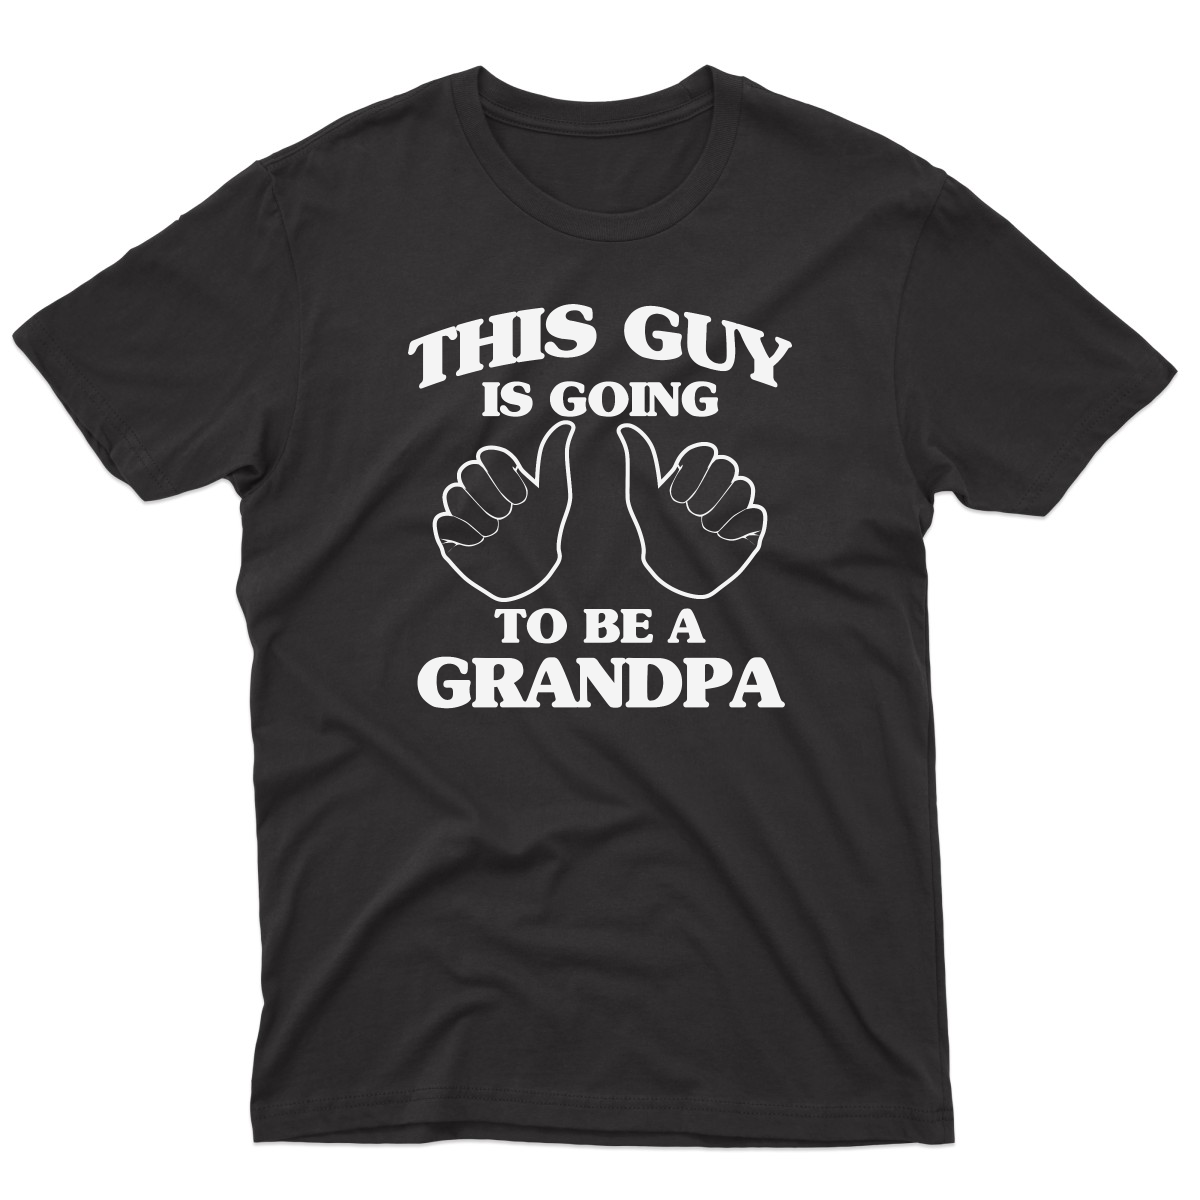 This Guy Is Going To Be A Grandpa Men's T-shirt | Black